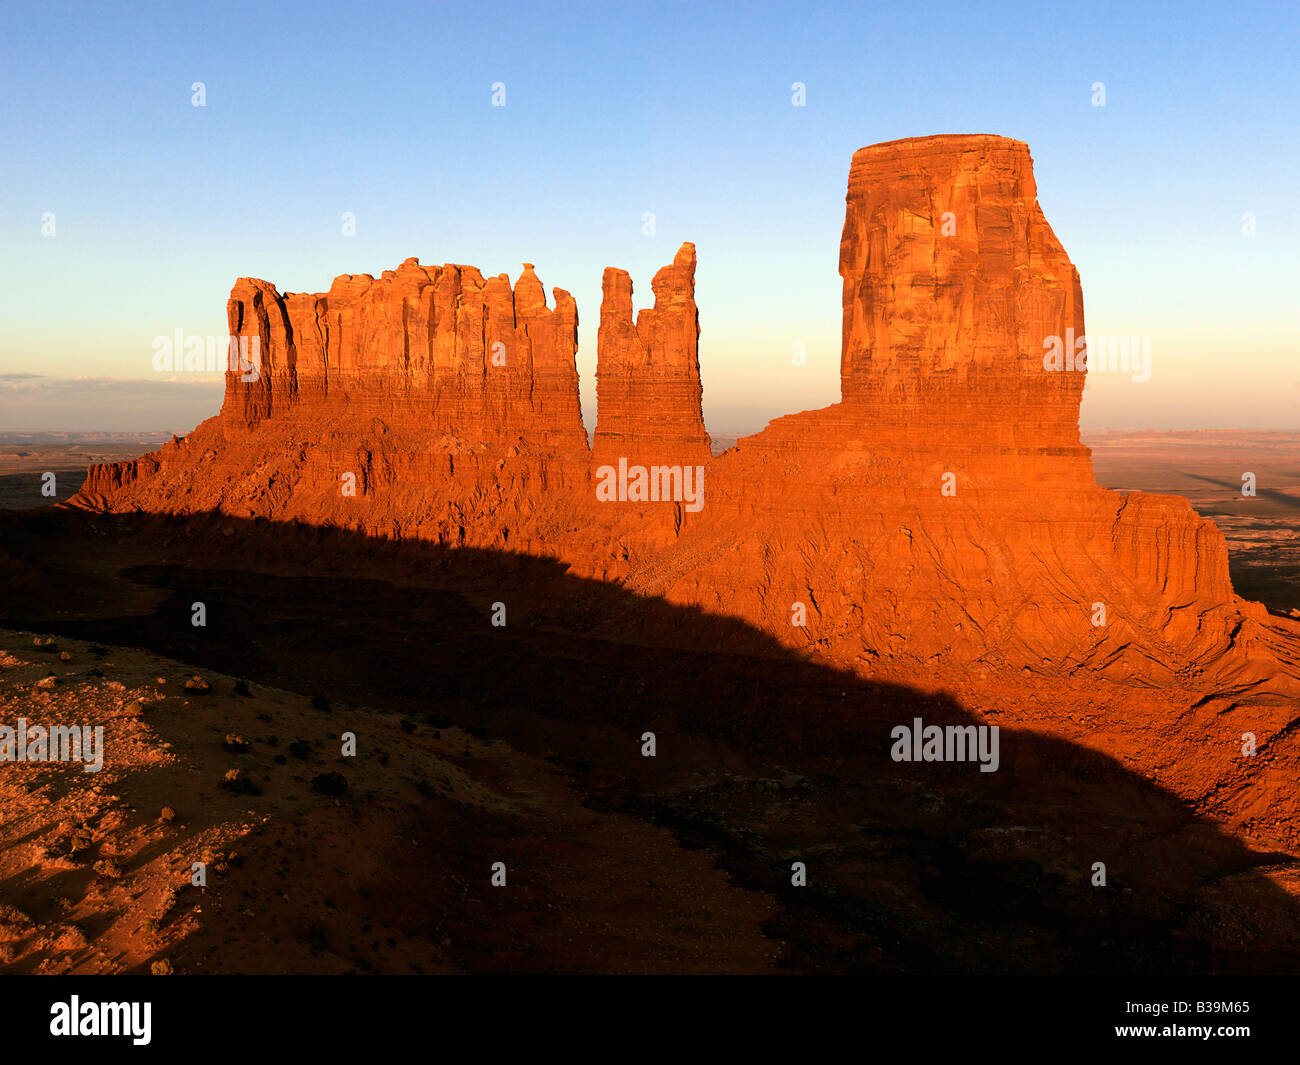 Scenic landscape of mesas in Monument Valley near the border of Arizona and Utah United States Stock Photo